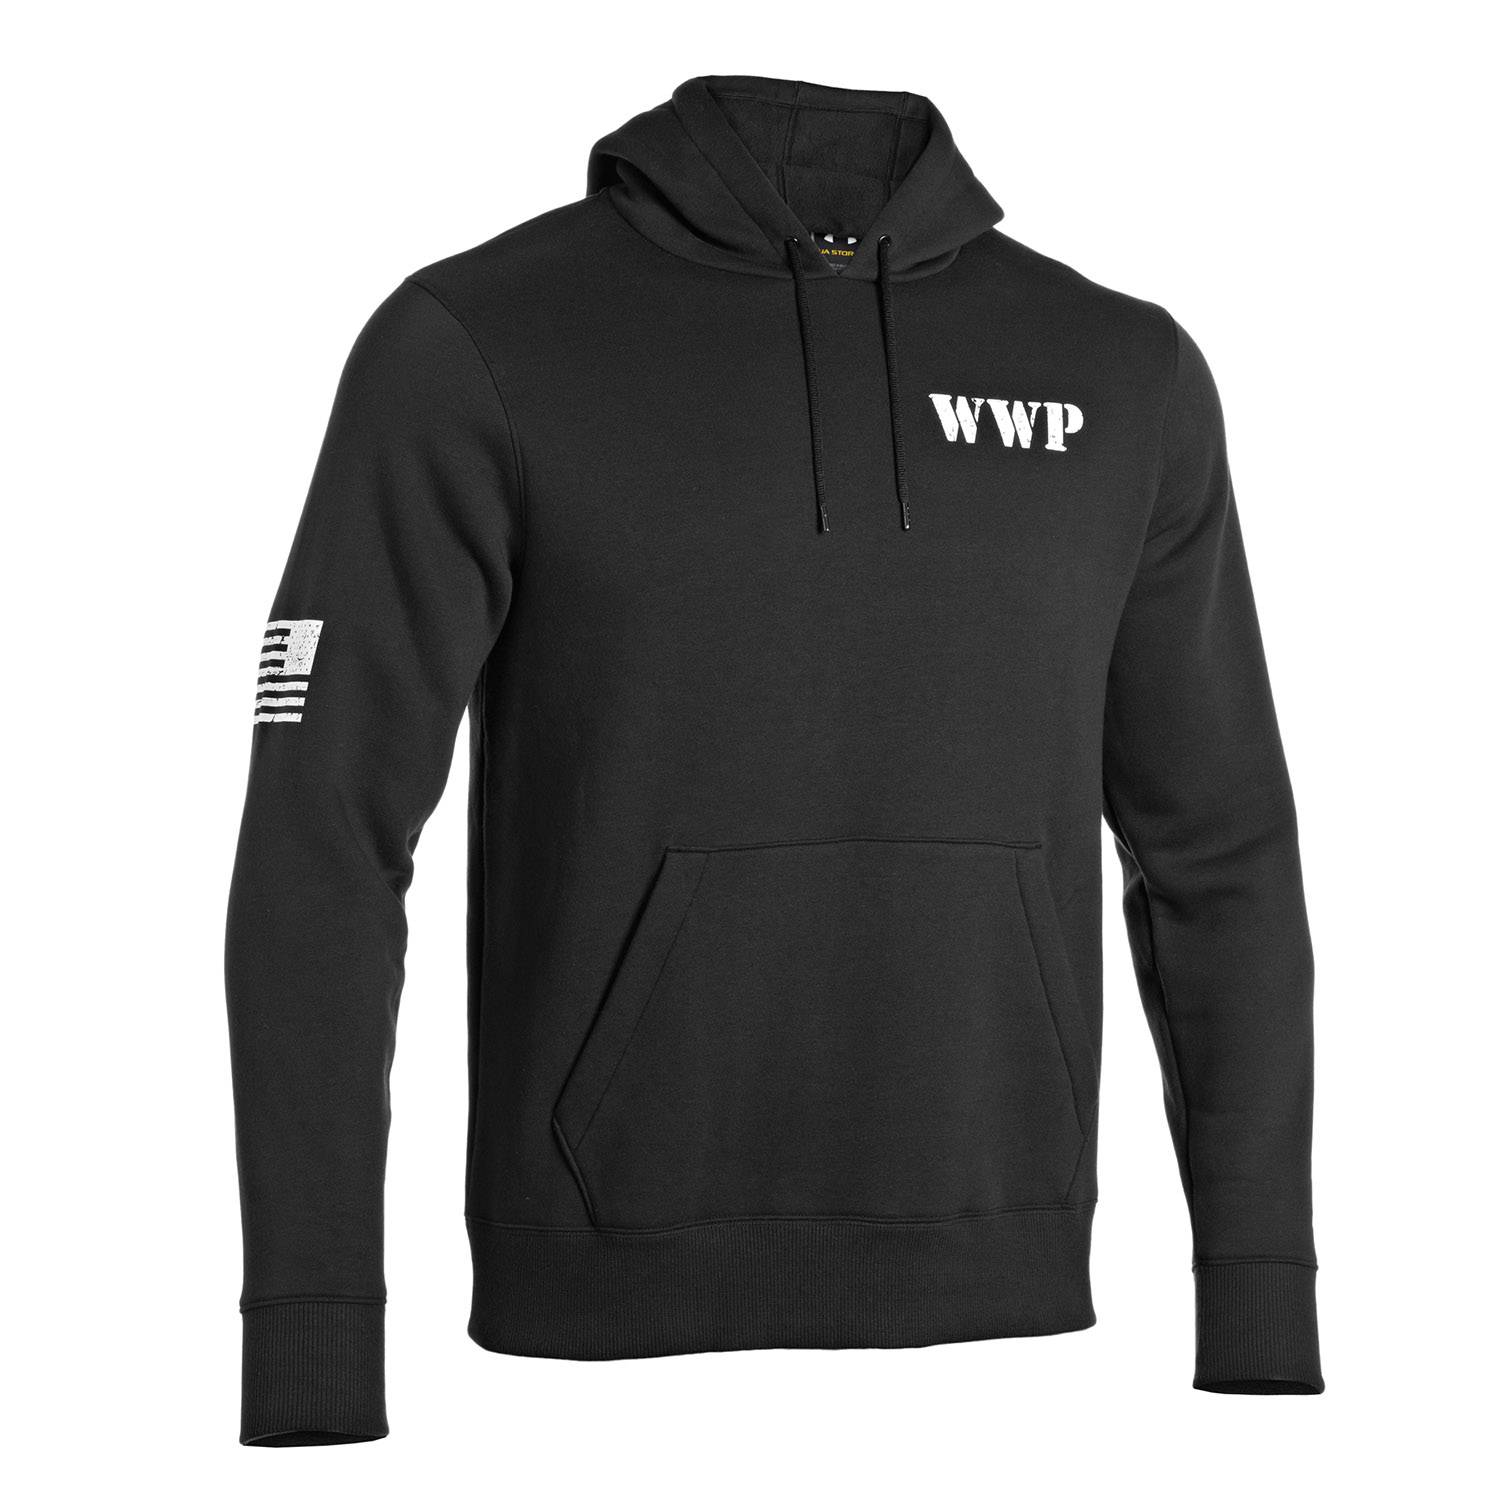 Under Armour WWP Storm Hoody